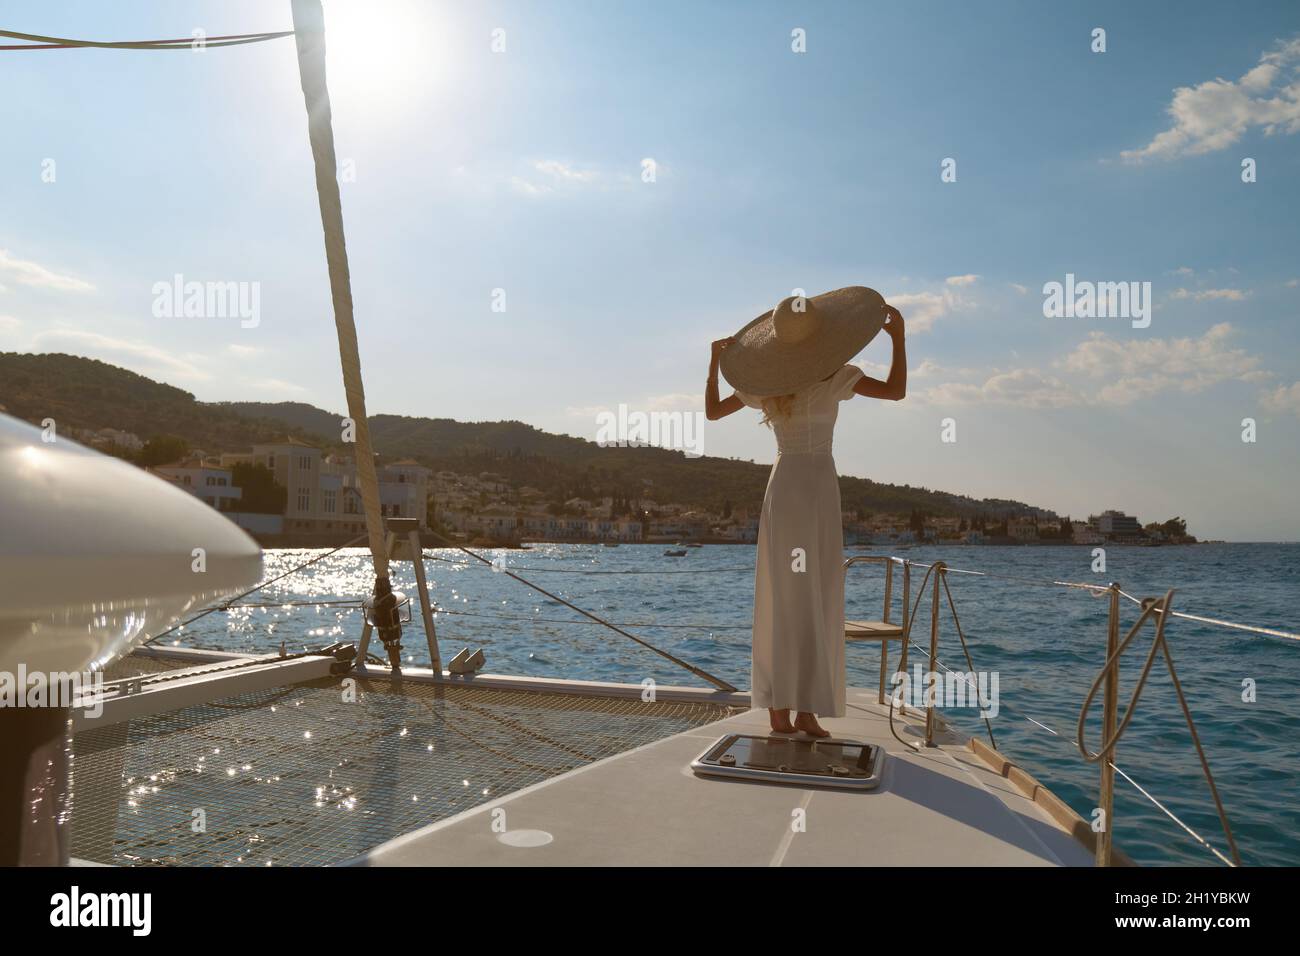 Beautiful woman wearing straw hat and white dress on a yacht enjoys the journey, Spetses, Greece, Europe Stock Photo